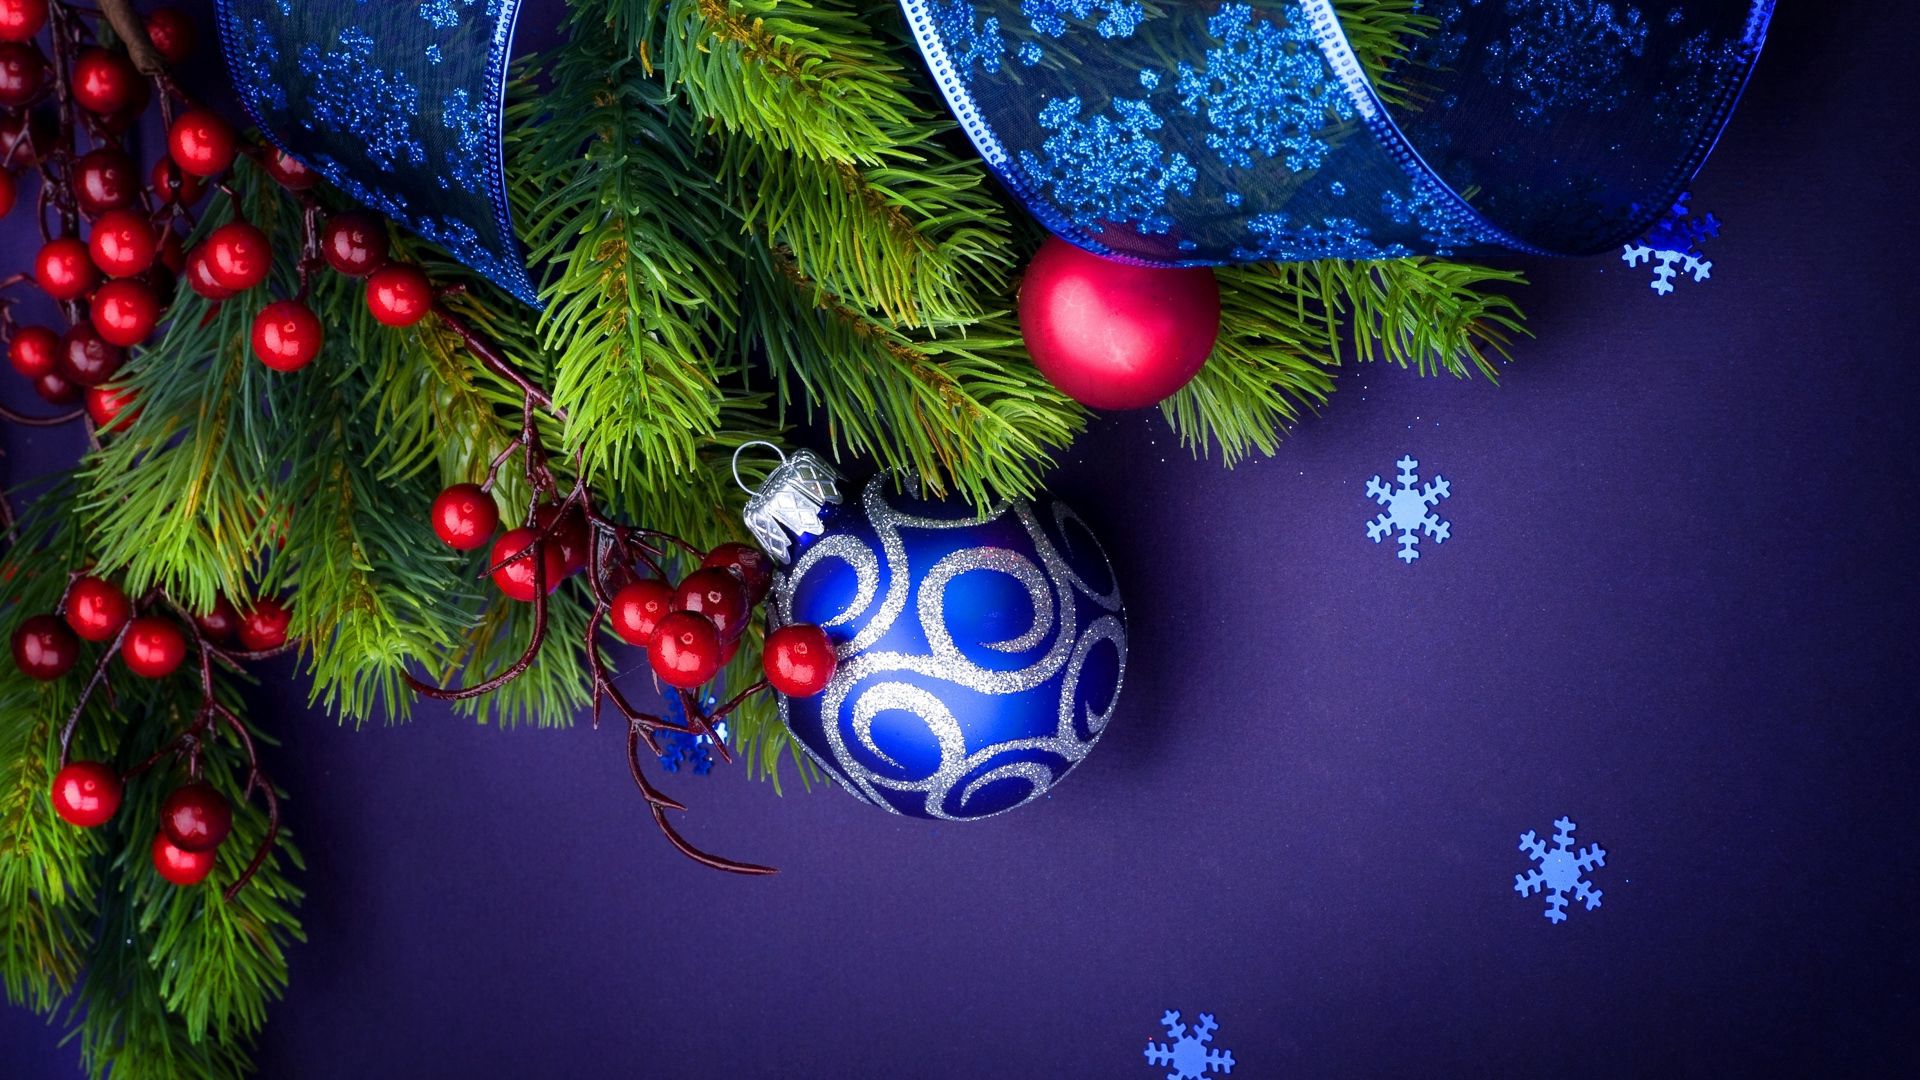 109590 download wallpaper holidays, new year, decorations, spruce, fir, ball screensavers and pictures for free